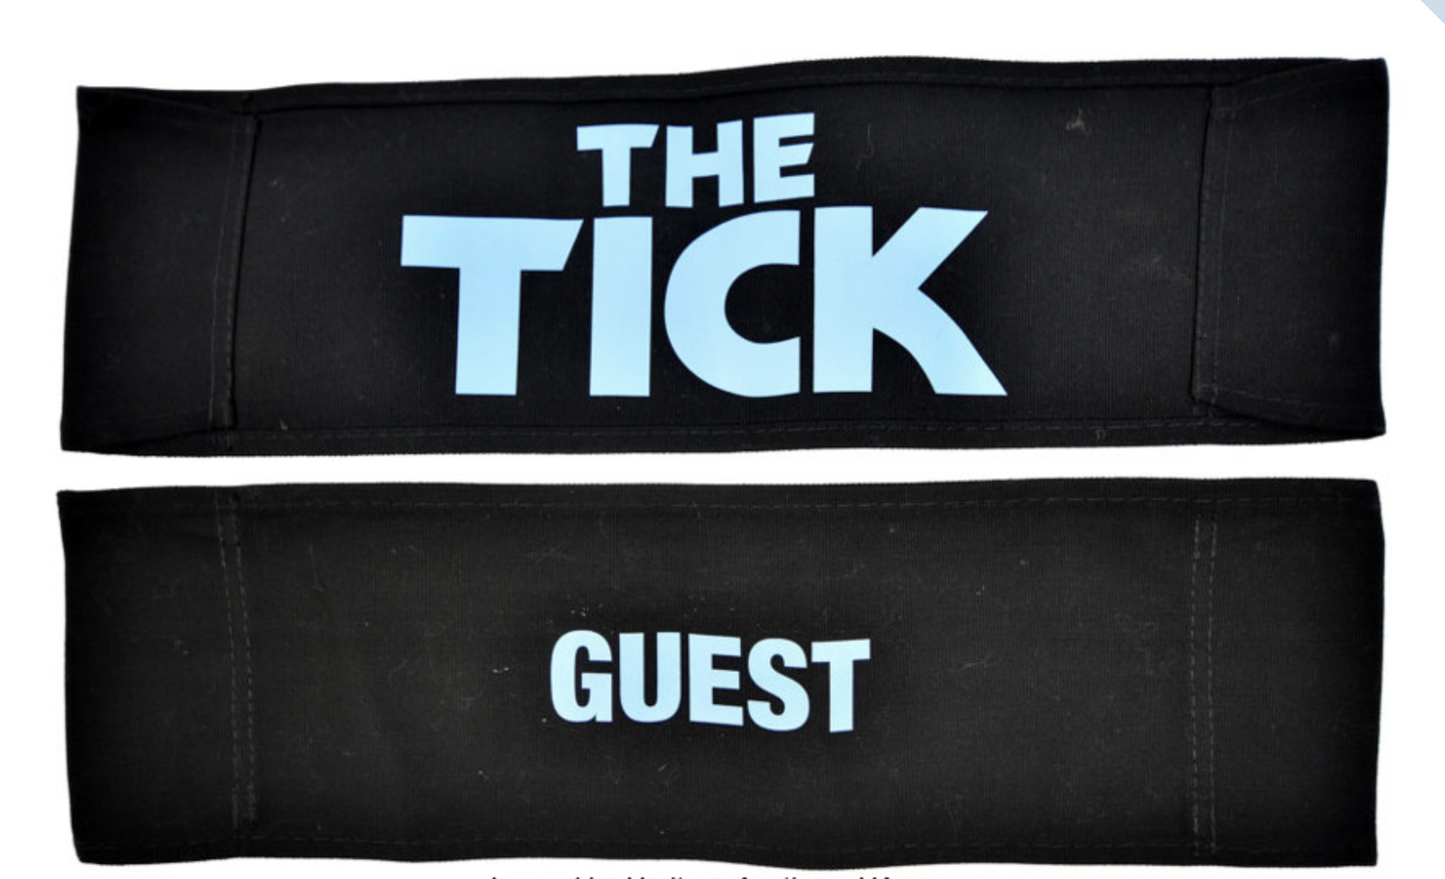 THE TICK: The Tick Chairback